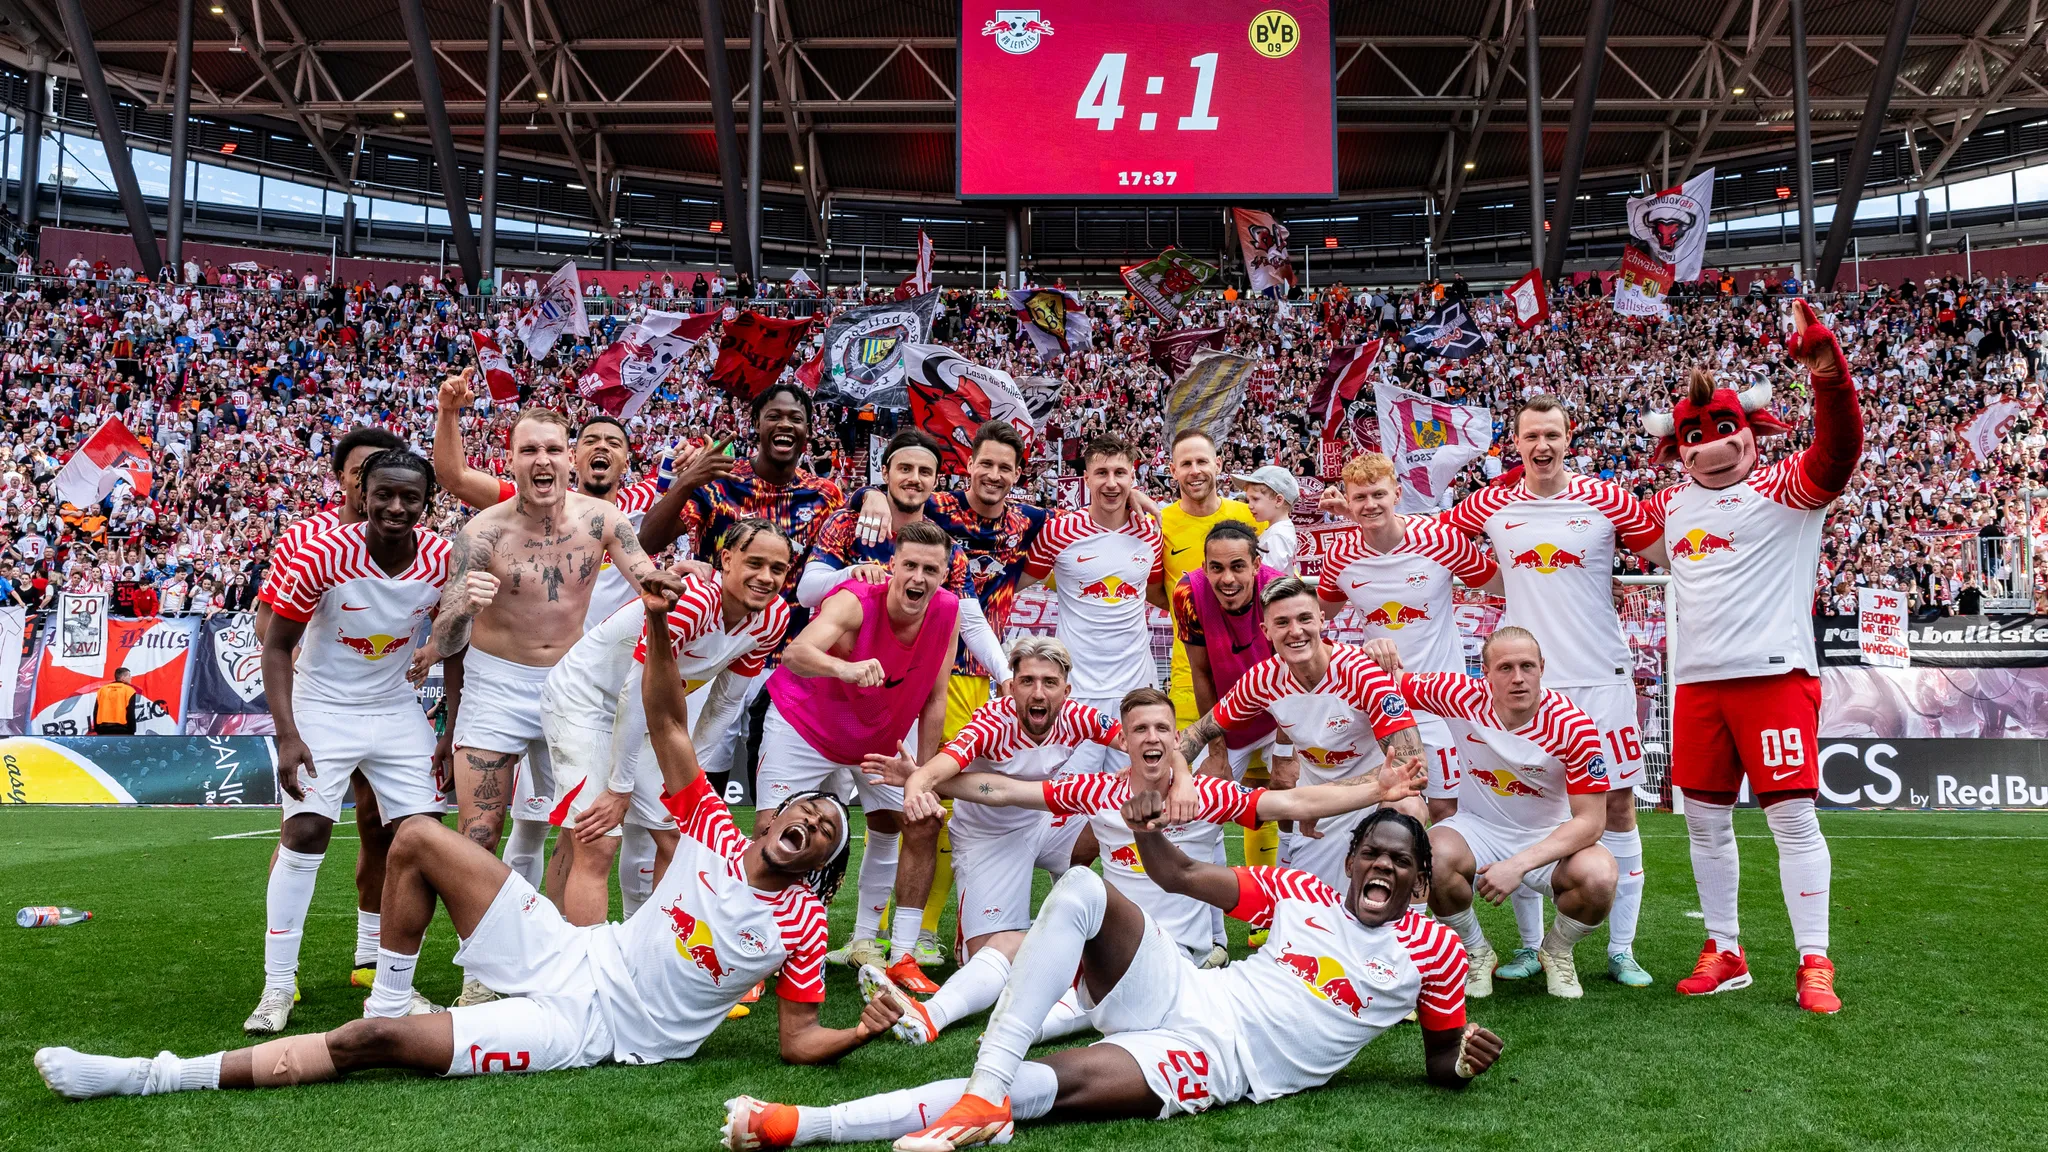 The players of RB Leipzig celebrate in front of their own stands after their home victory against Borussia Dortmund.